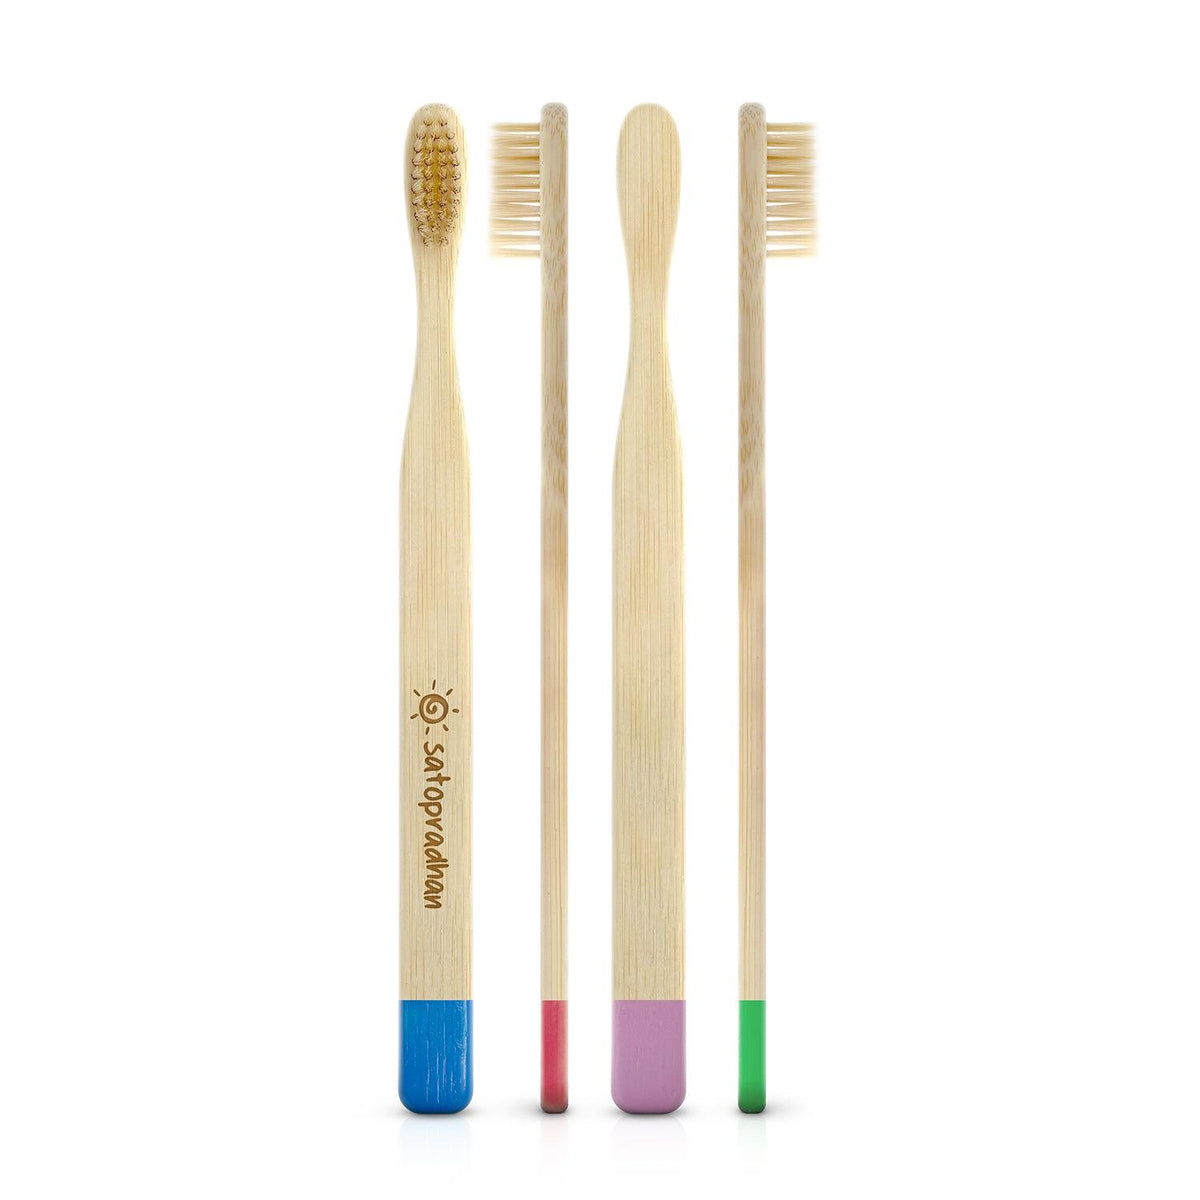 Toothbrushes - Set of 4 with Bamboo Handles & Biodegradable Bristles - Colored markings for easier identification